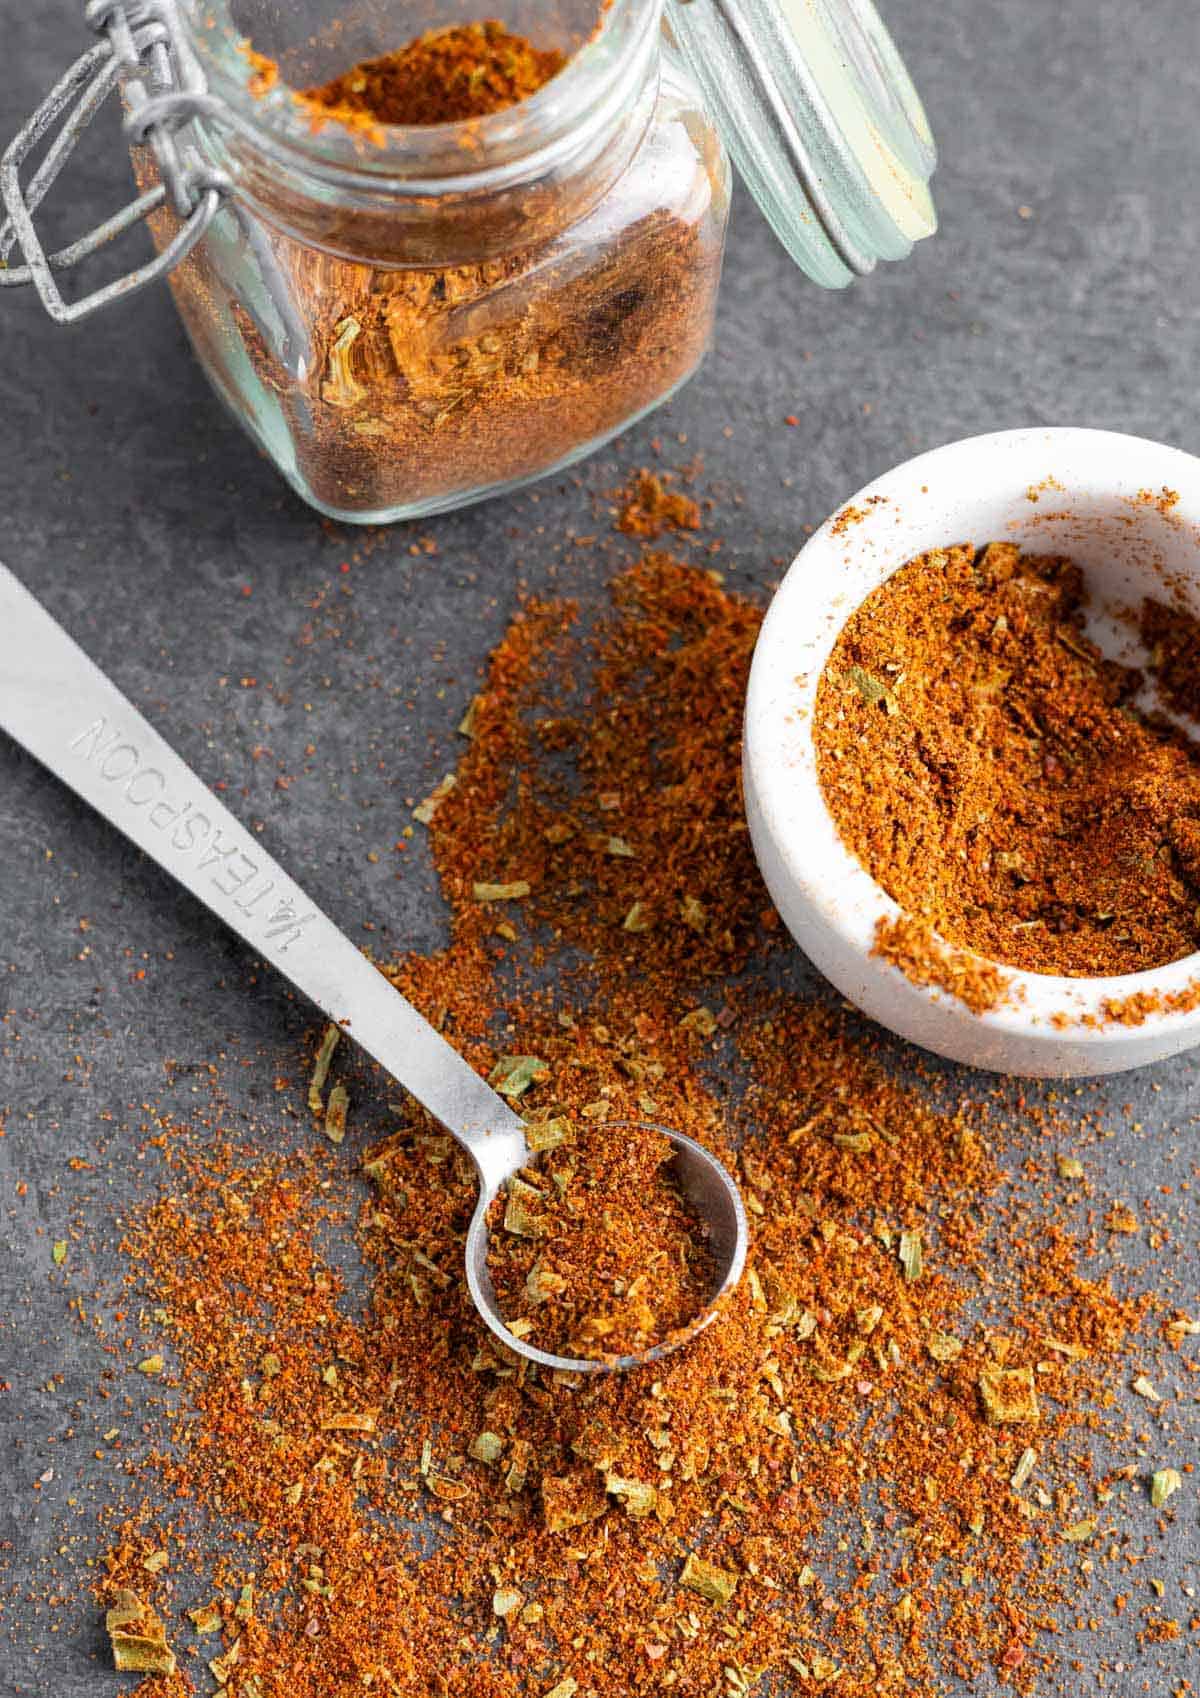 Pile of taco seasoning with some on a teaspoon.